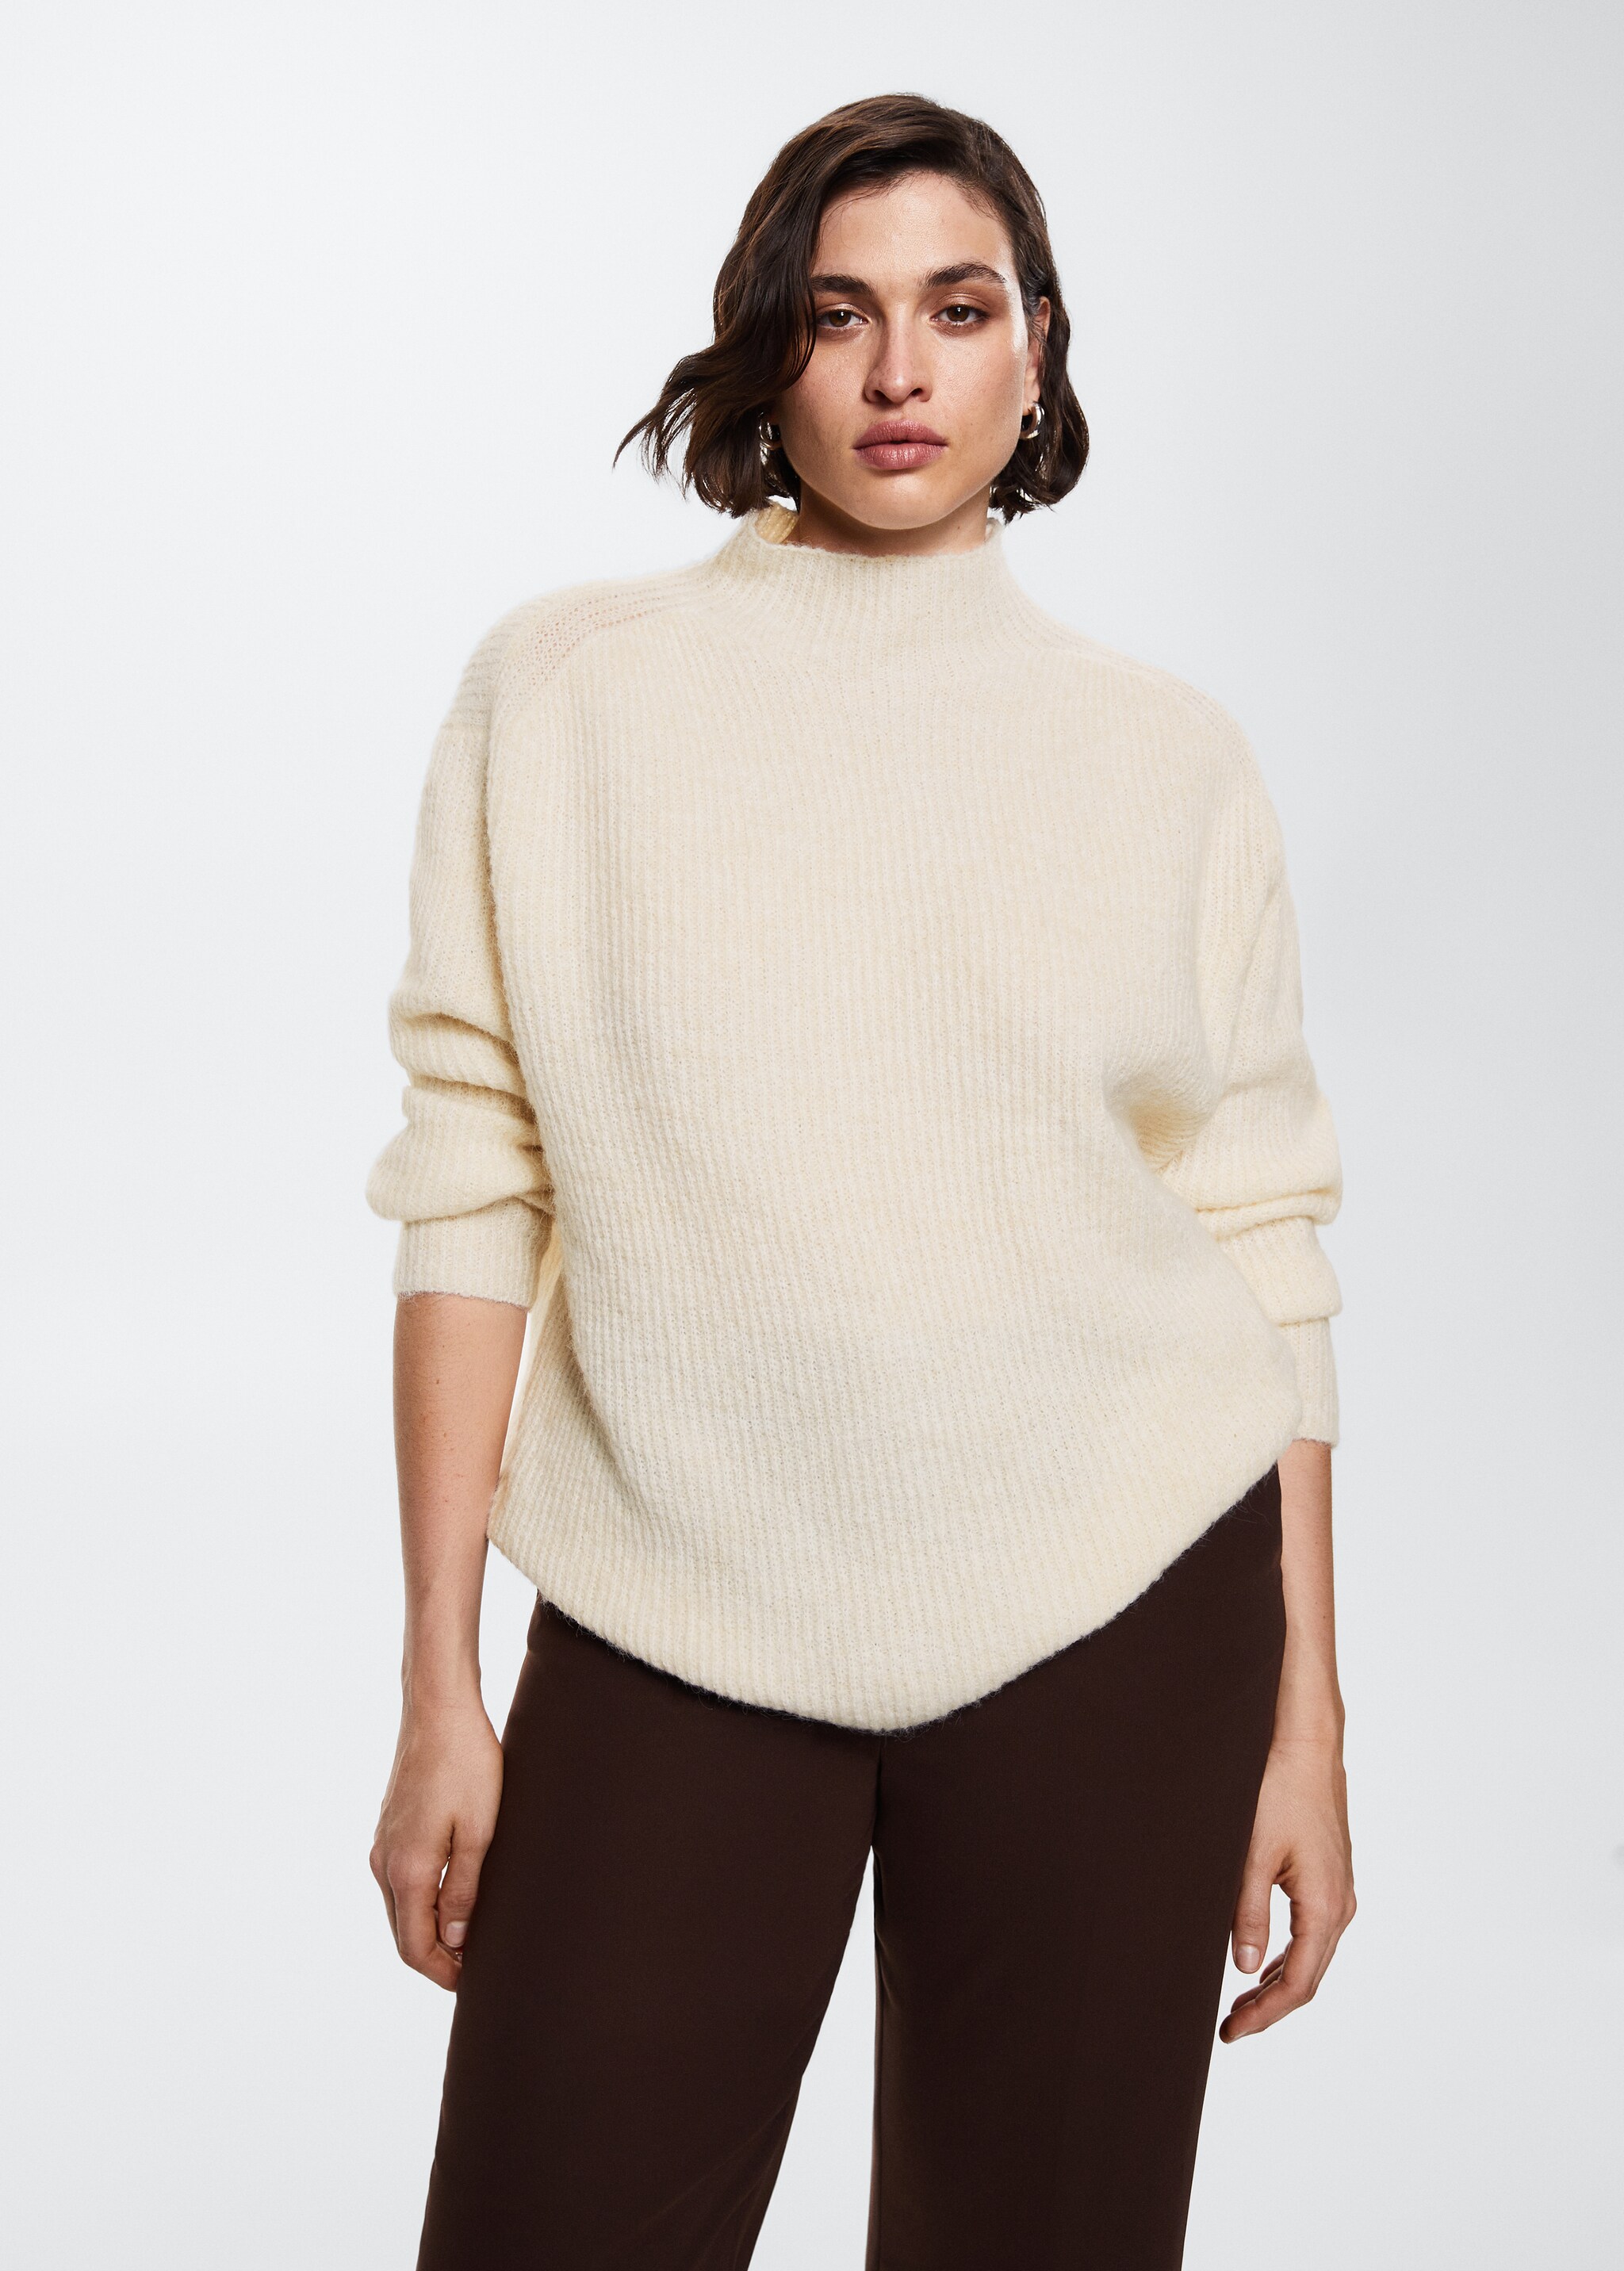 High collar sweater - Details of the article 5